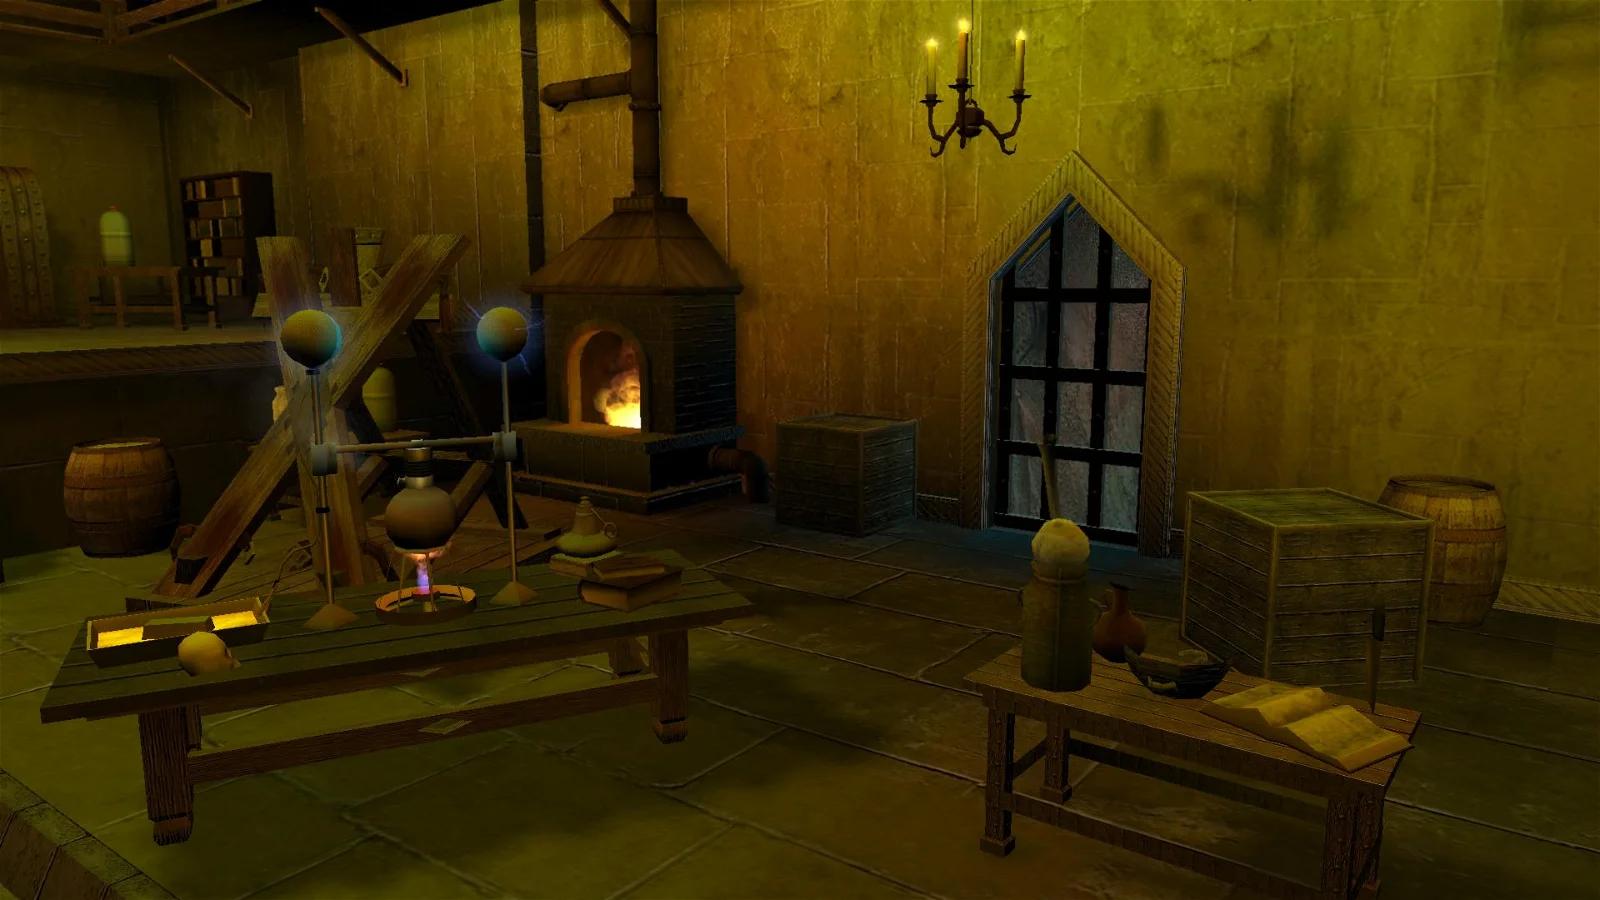 A screenshot from a video game showing a medieval-style room with a fireplace, tables with alchemical equipment, and a window.
